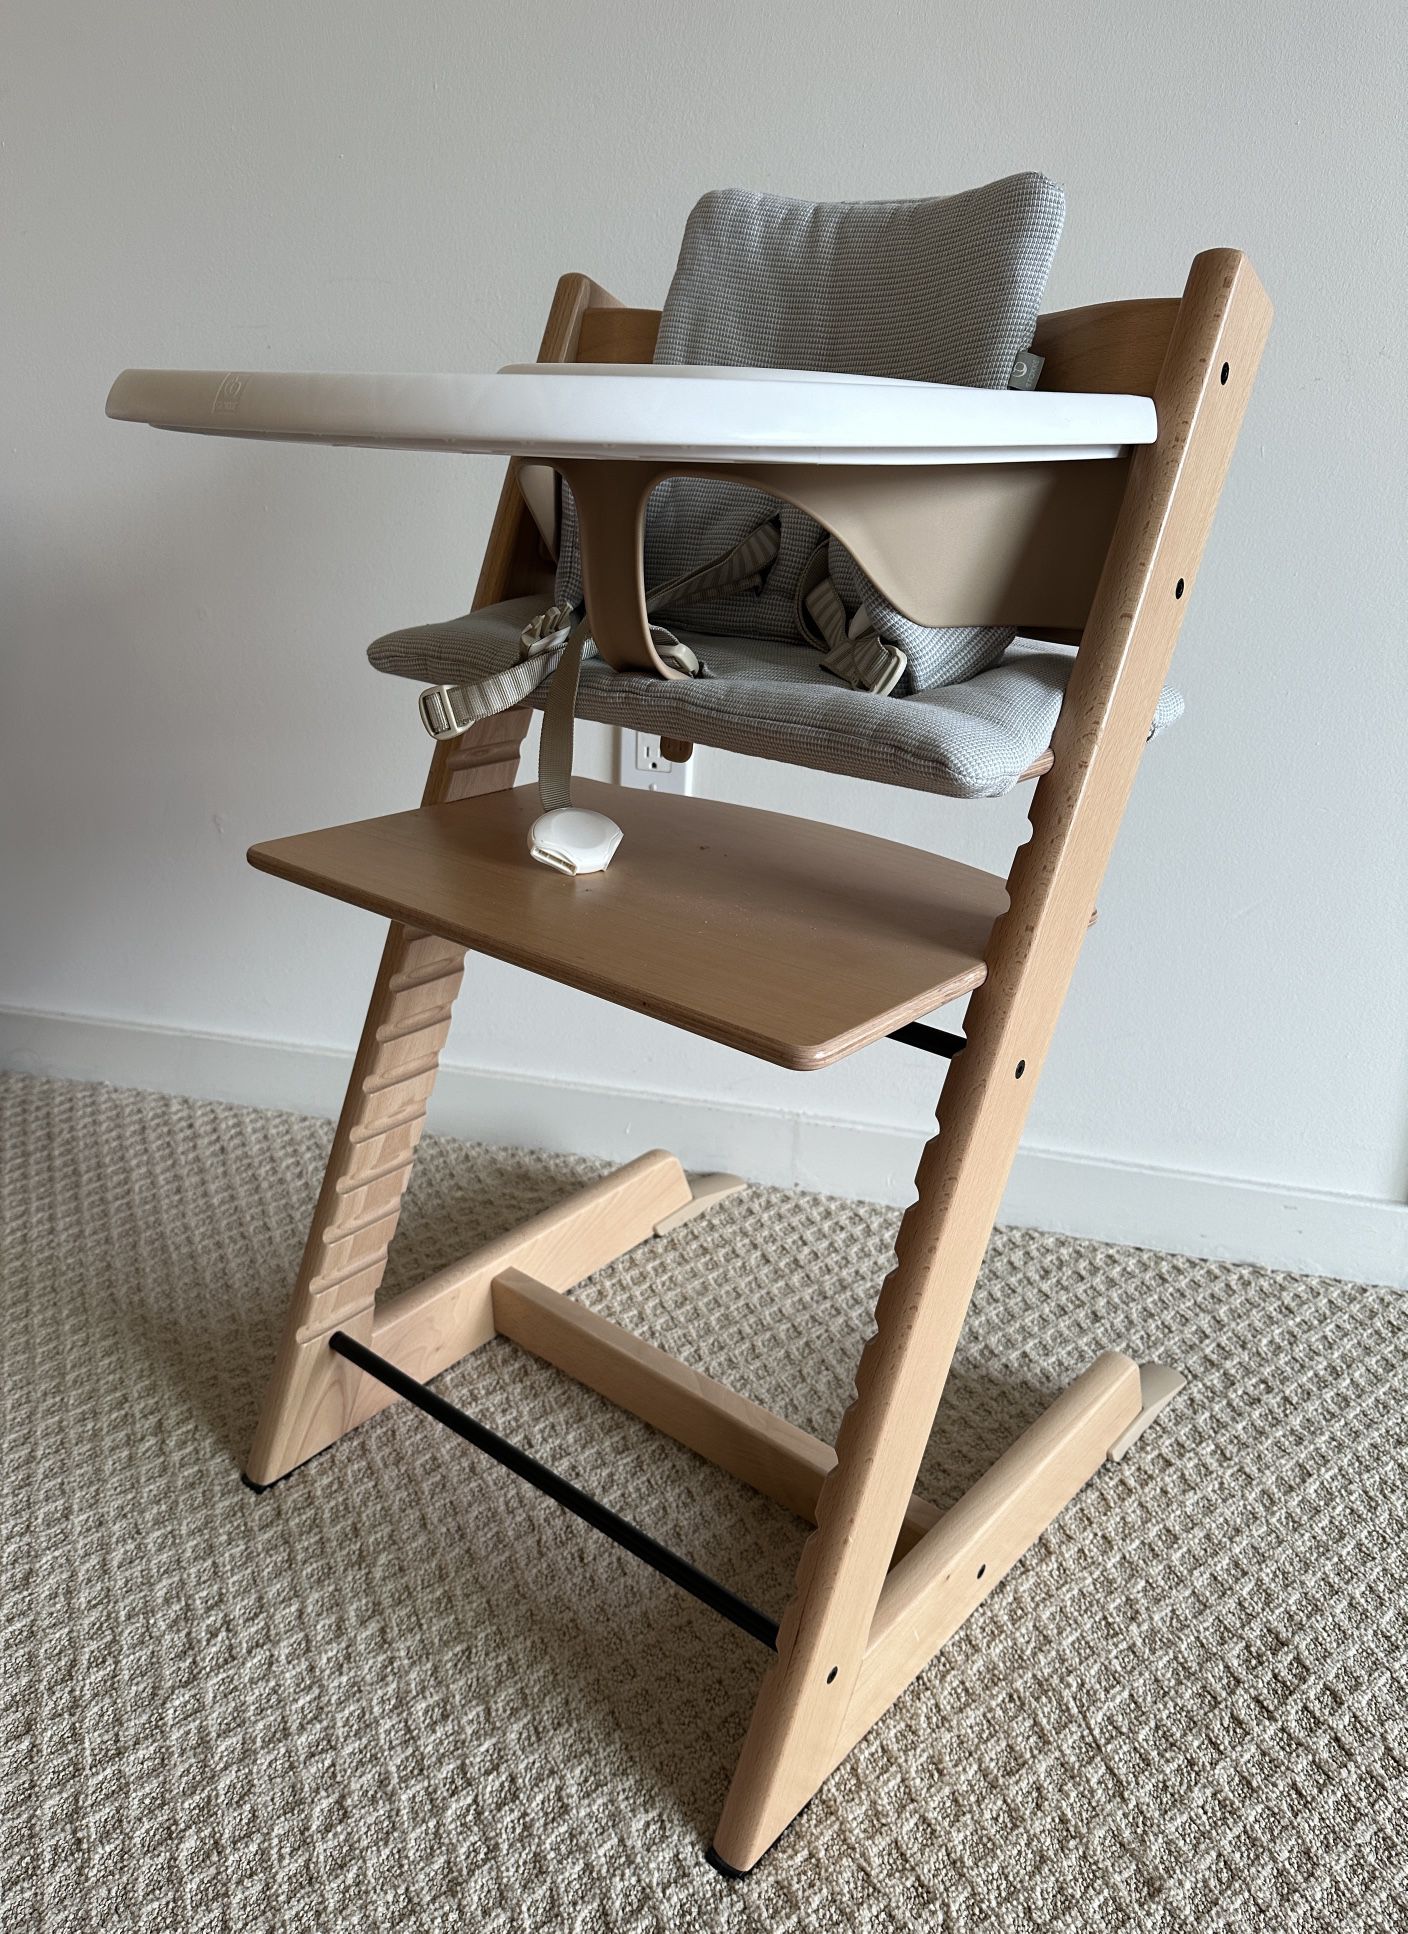 Stokke Tripp Trapp High Chair Complete With Tray And Seat Cover